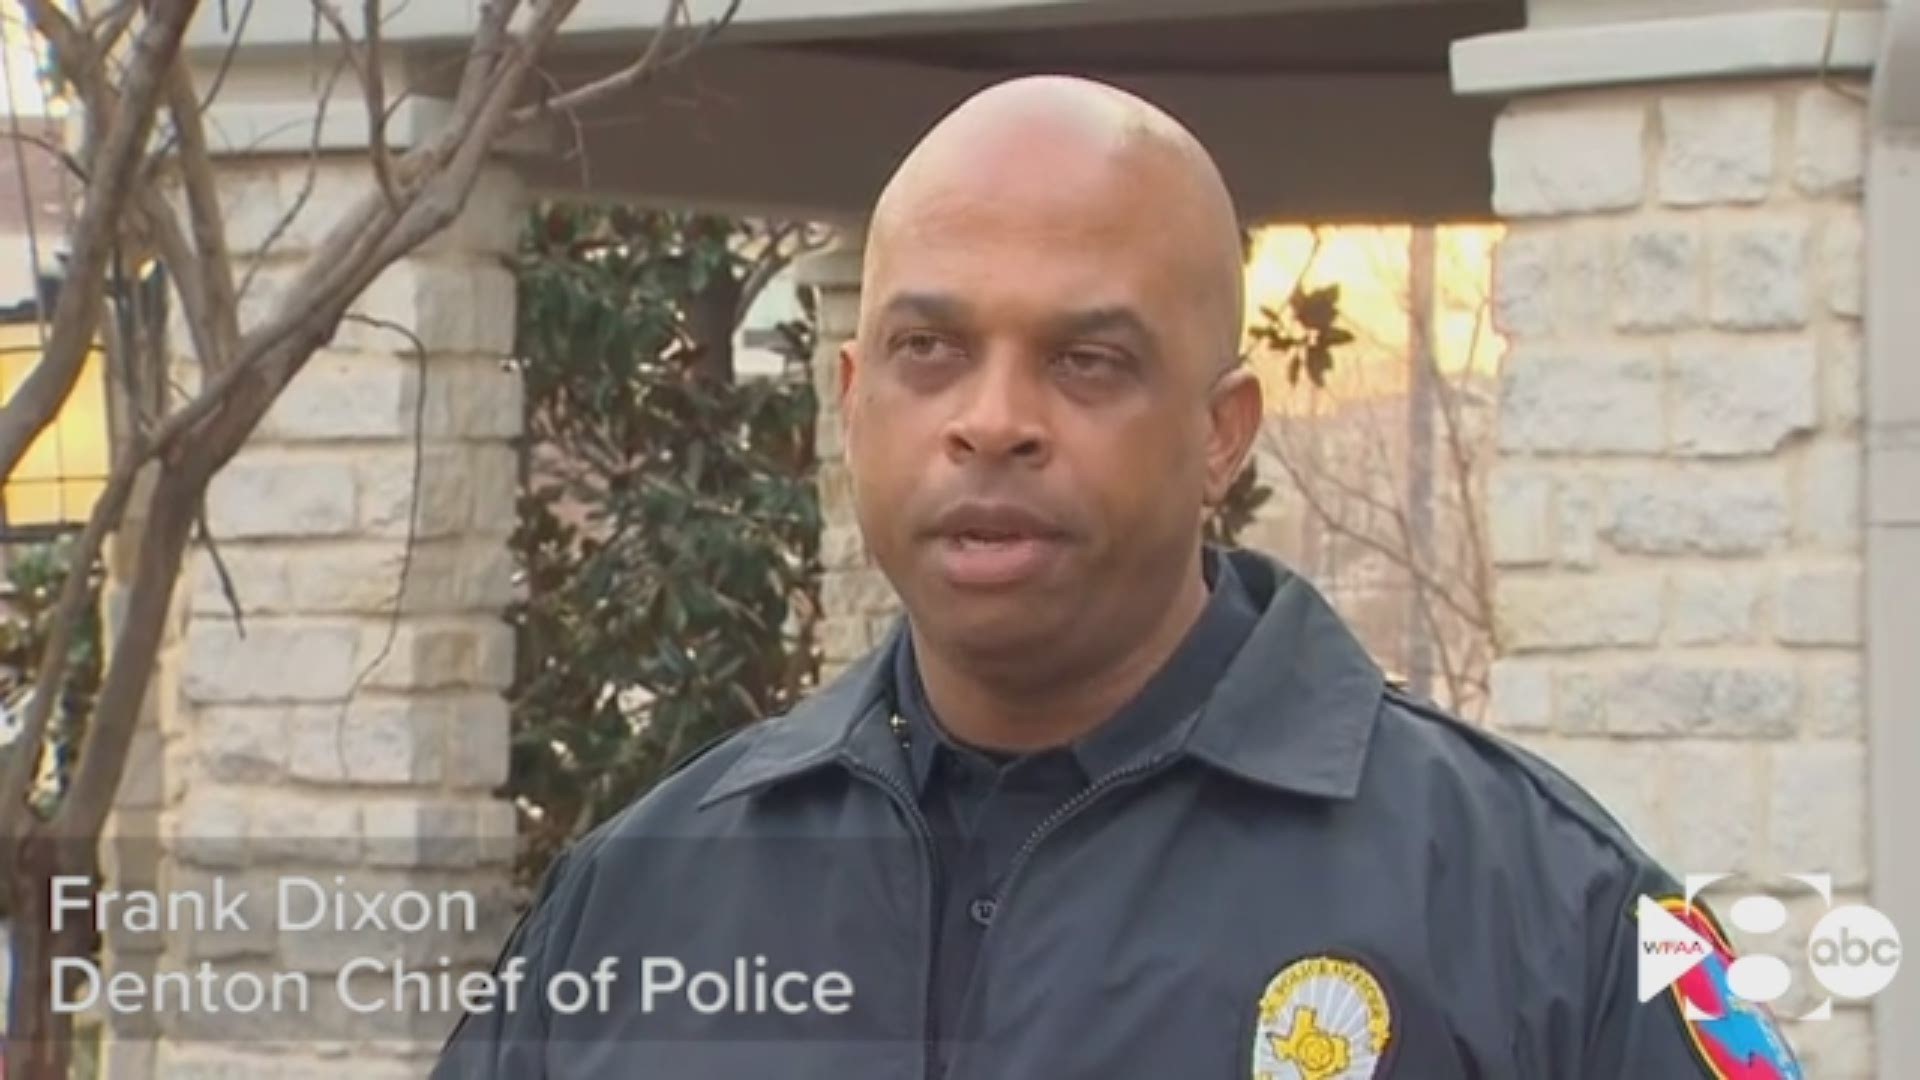 A man wielding a cleaver and frying pan wounded an officer and was shot and killed by a Denton police officer early Tuesday, Chief of Police Frank Dixon said.